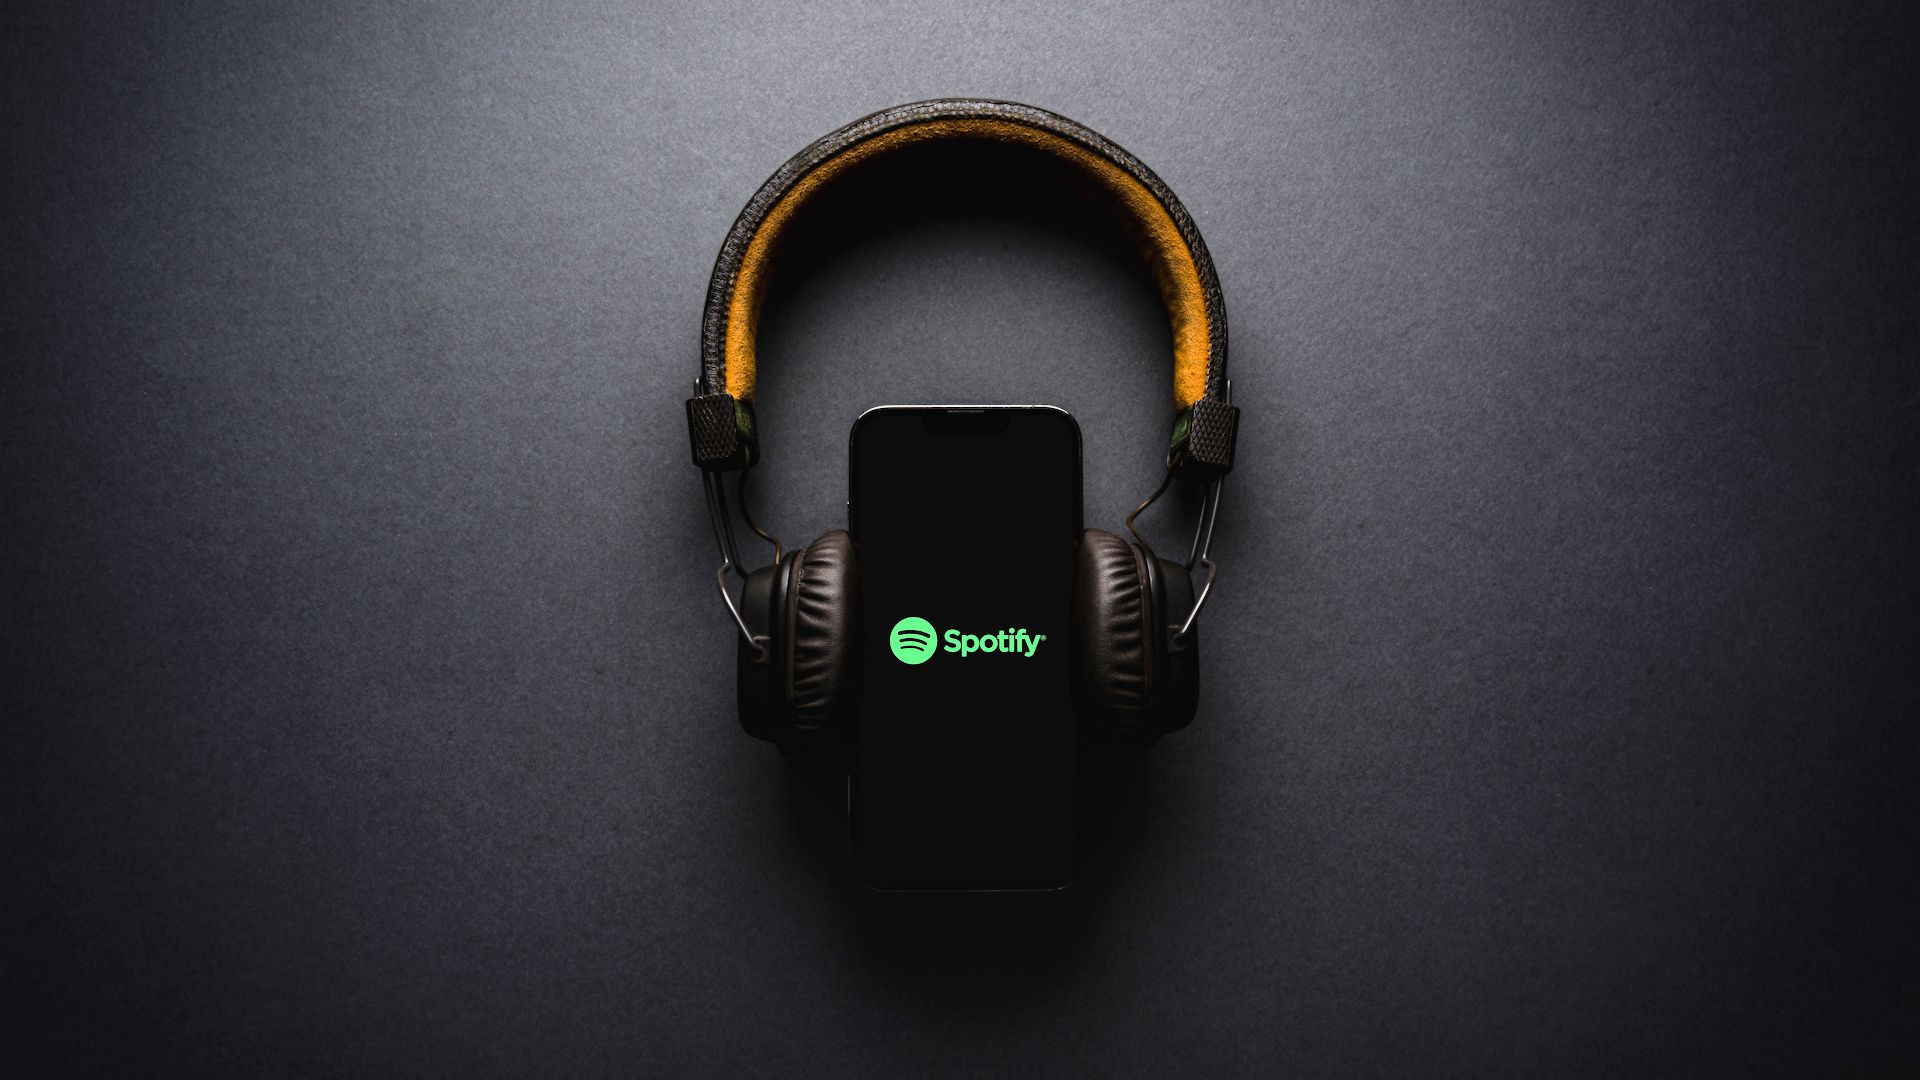 spotify logo on smartphone with headphones